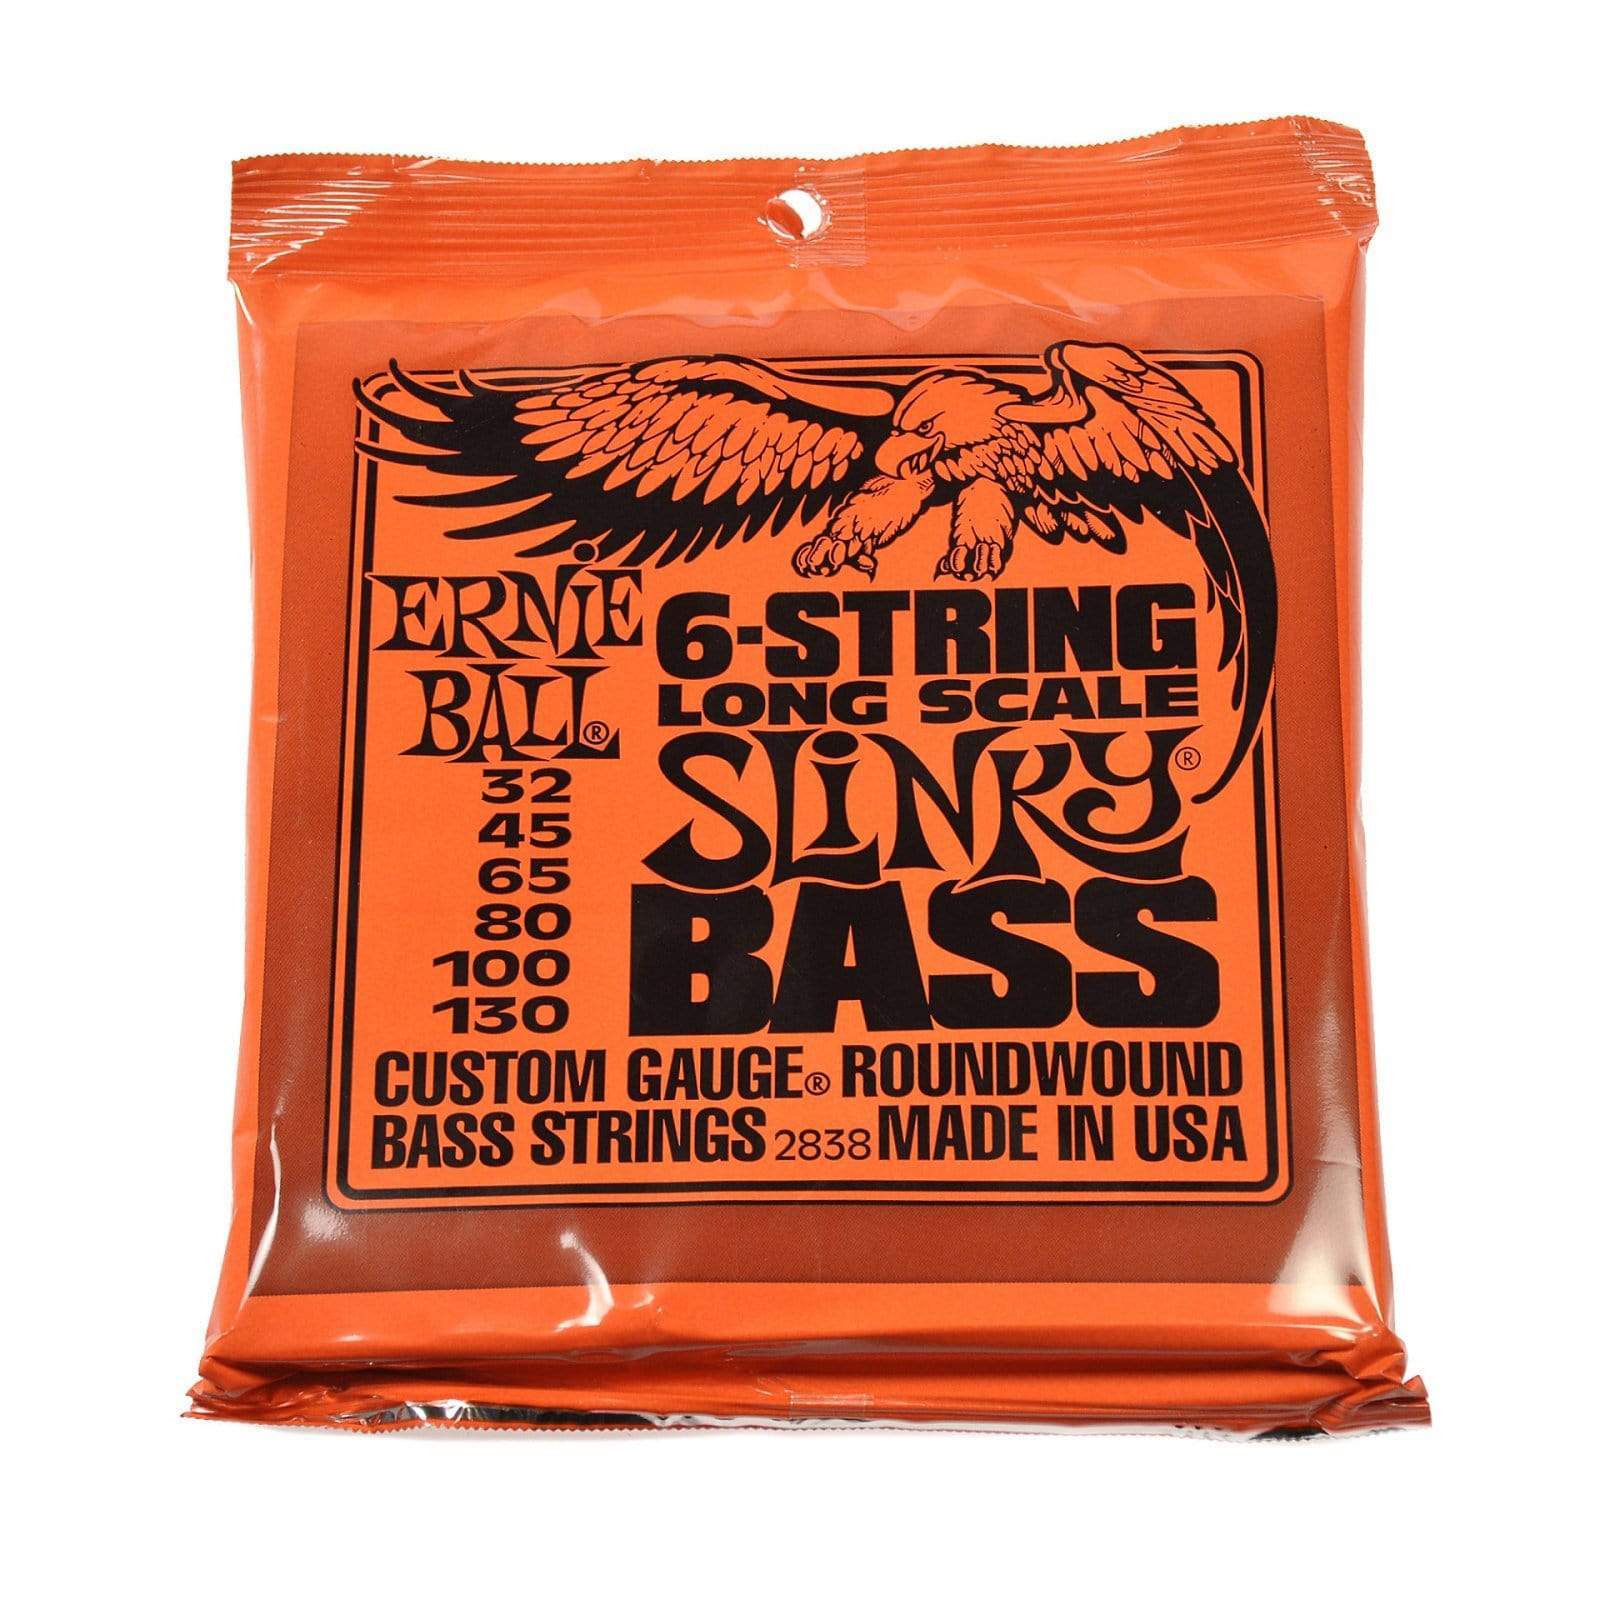 Ernie Ball 2838 Long-Scale Slinky 6-String Bass 32-130 Accessories / Strings / Bass Strings